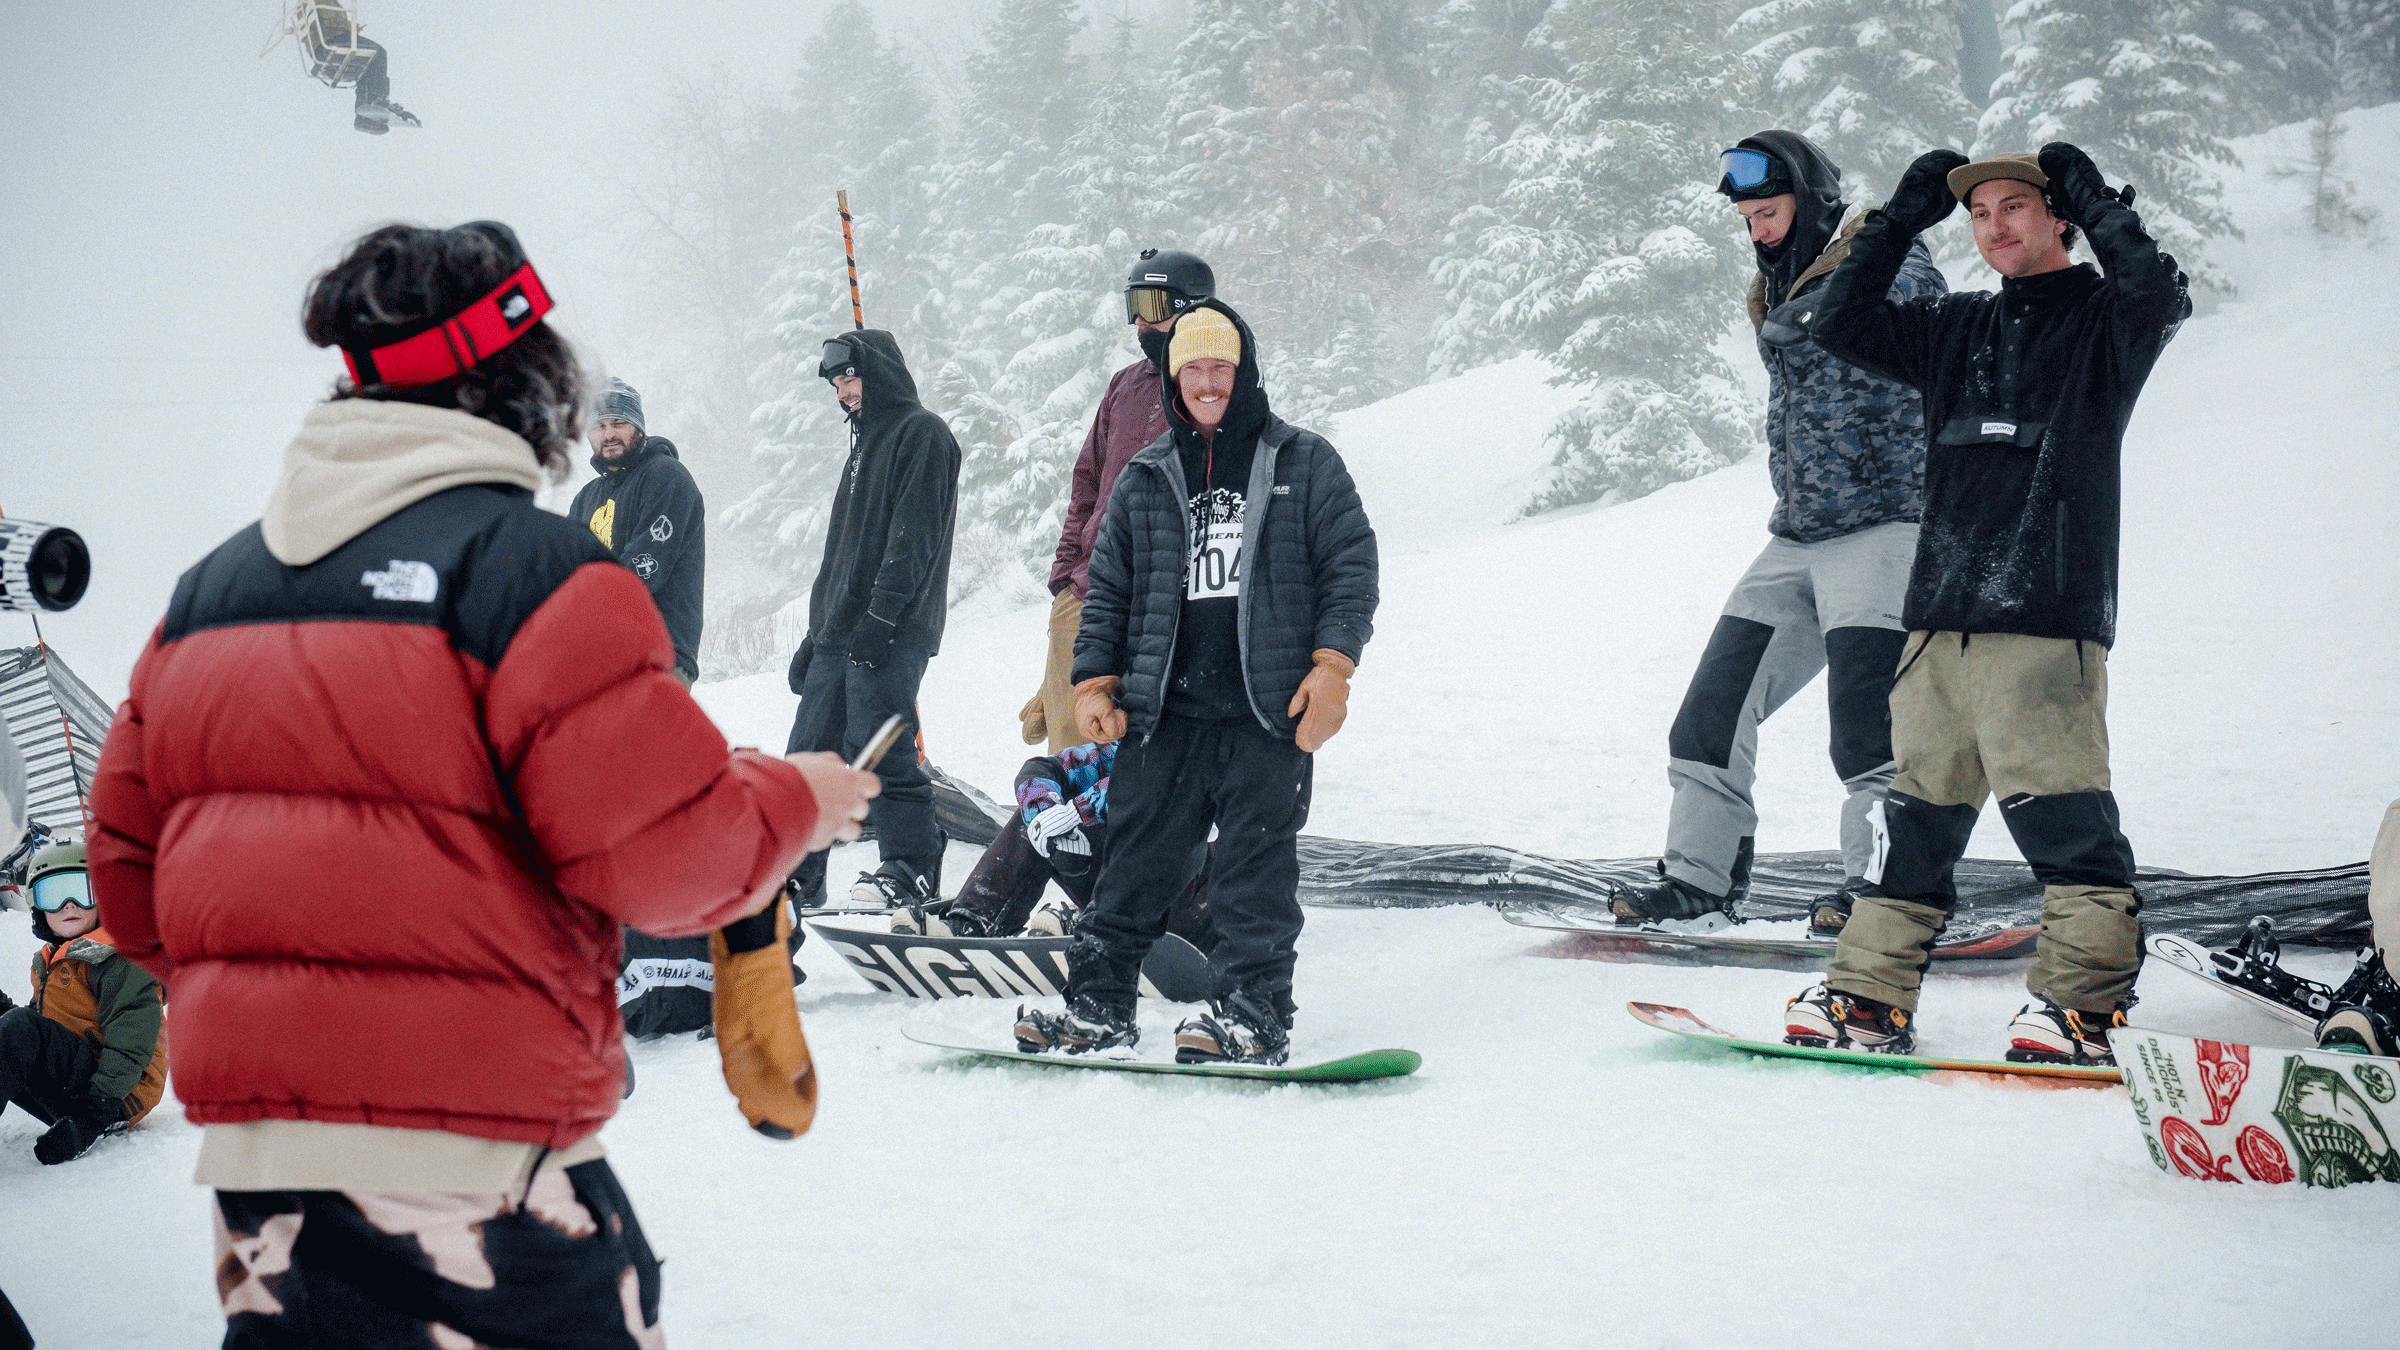 Group of snowboarders on the snowy mountain